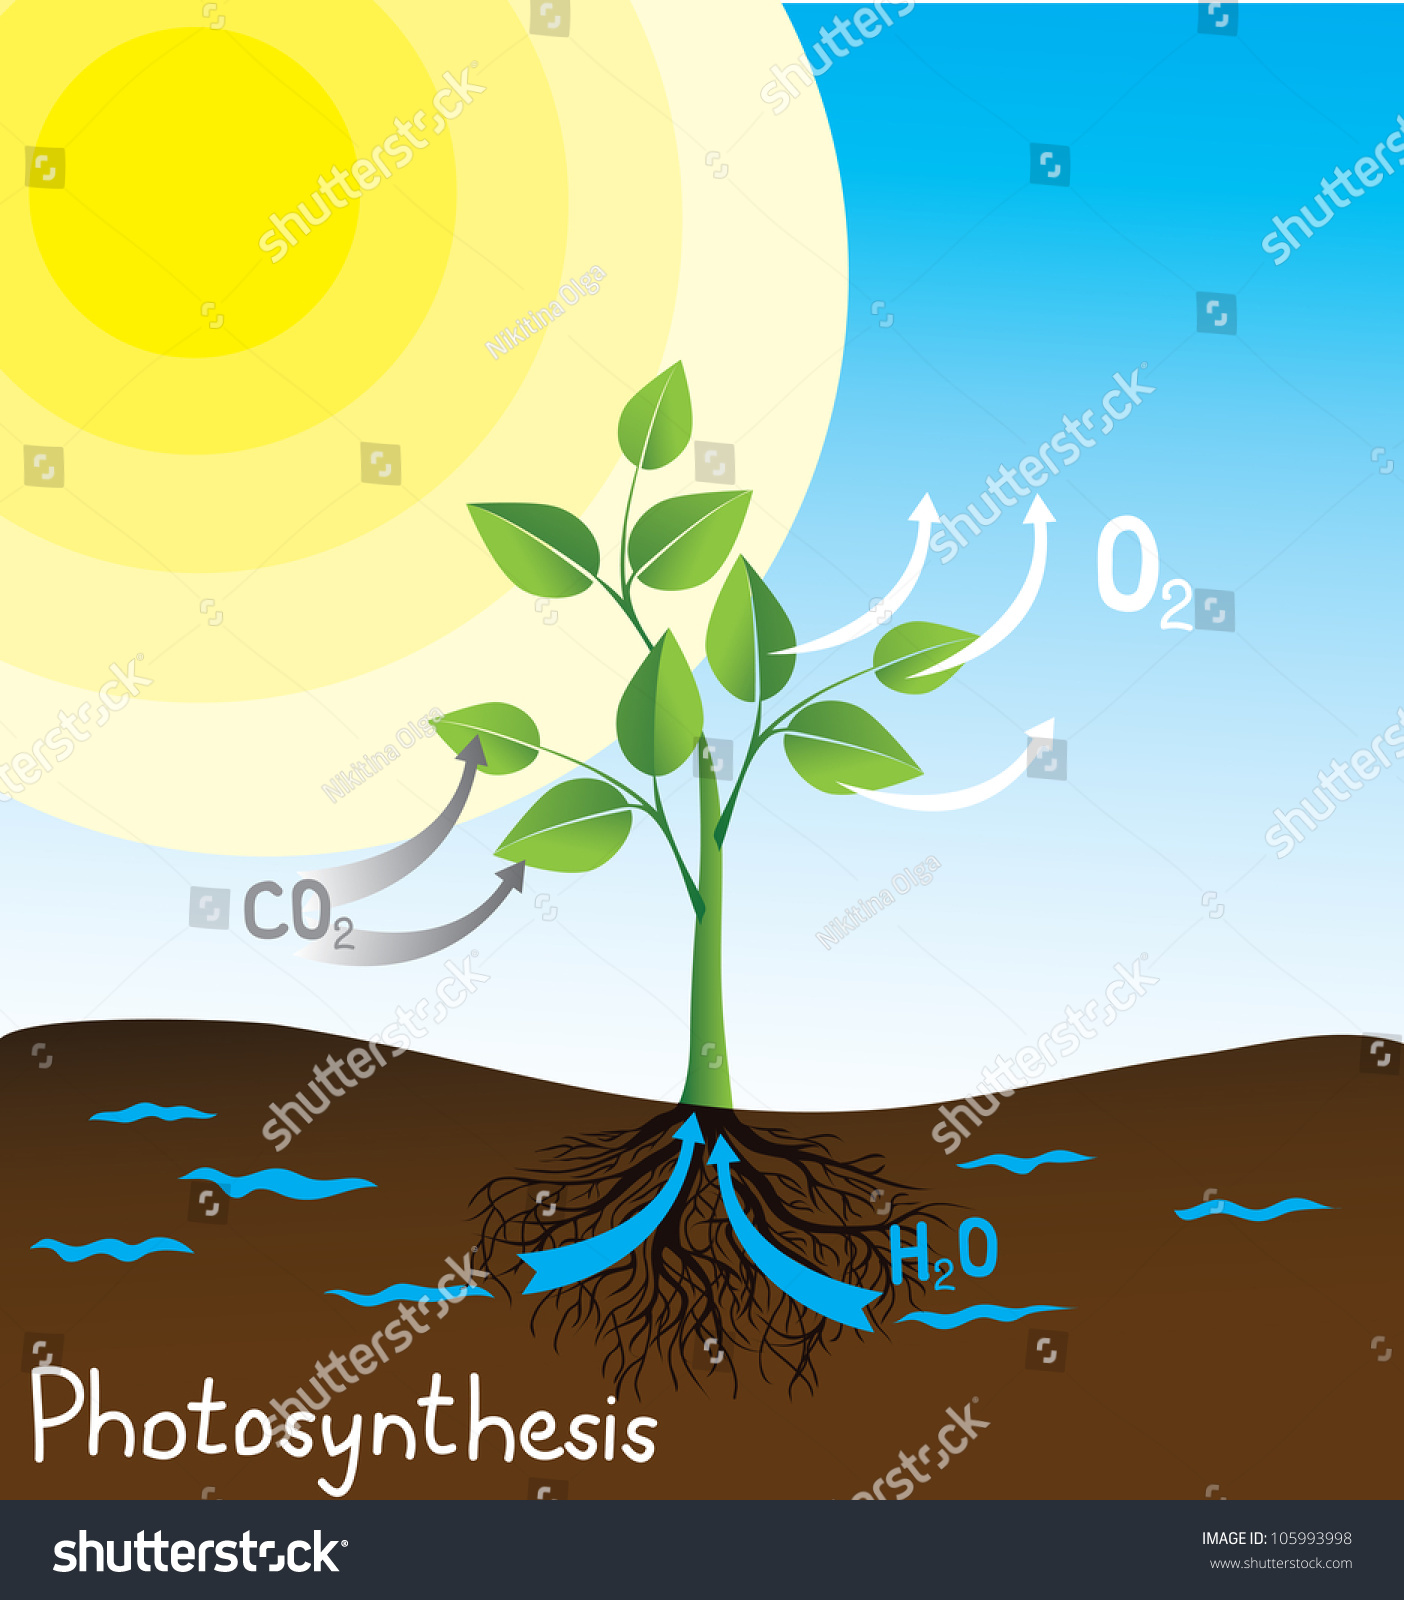 Photosynthesis Vector Image Simple Scheme Students Stock Vector ...